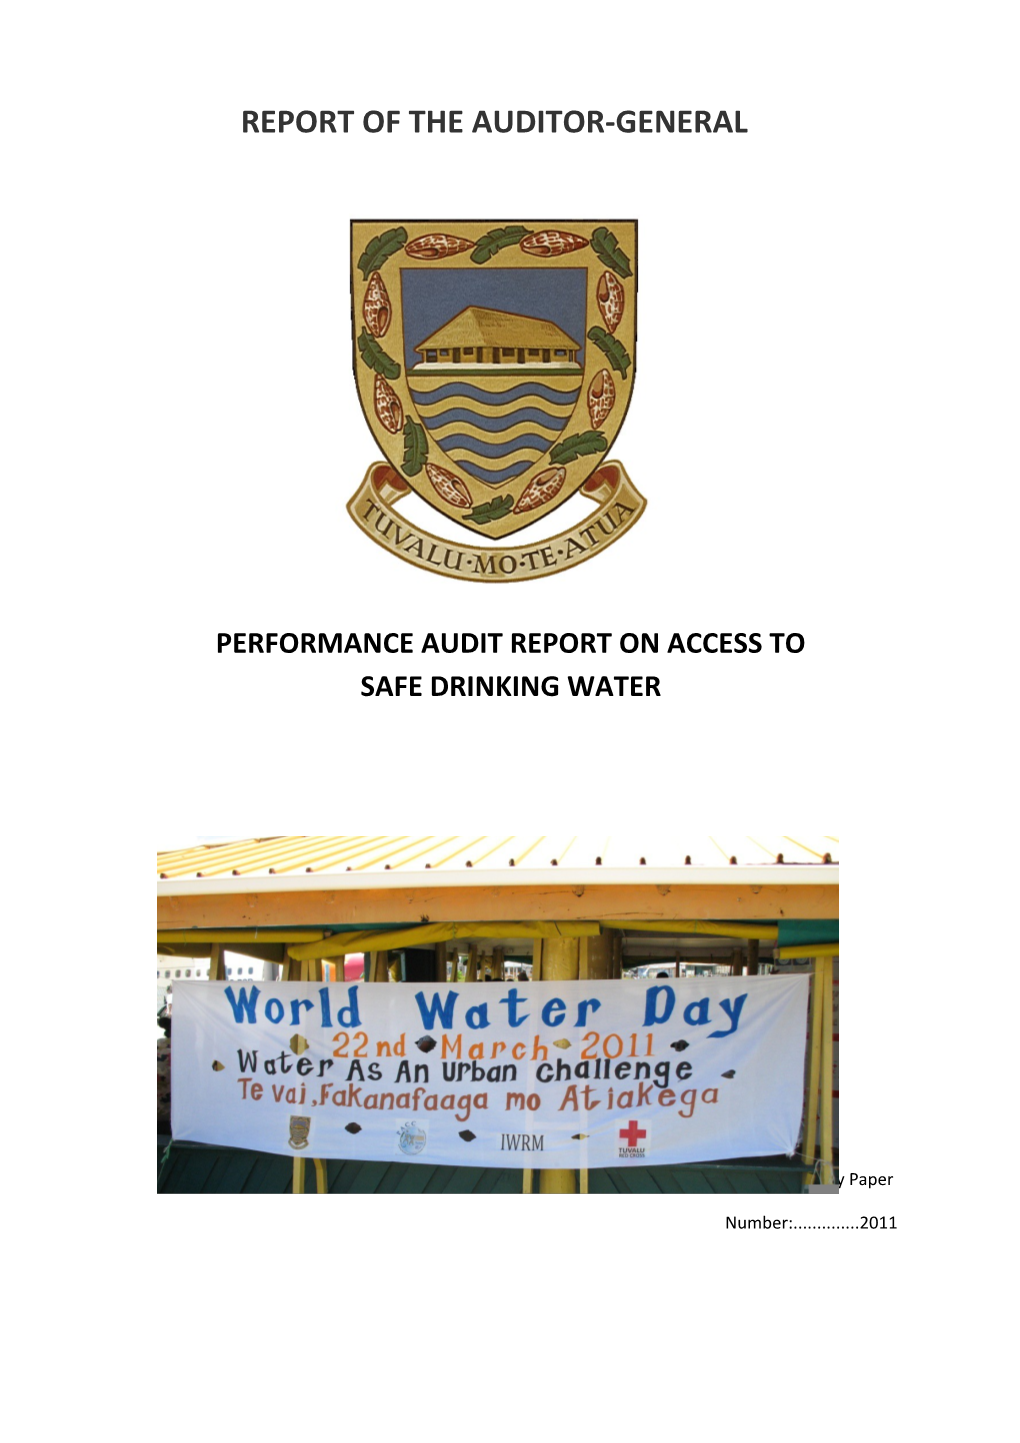 Access to Safe Drinking Water